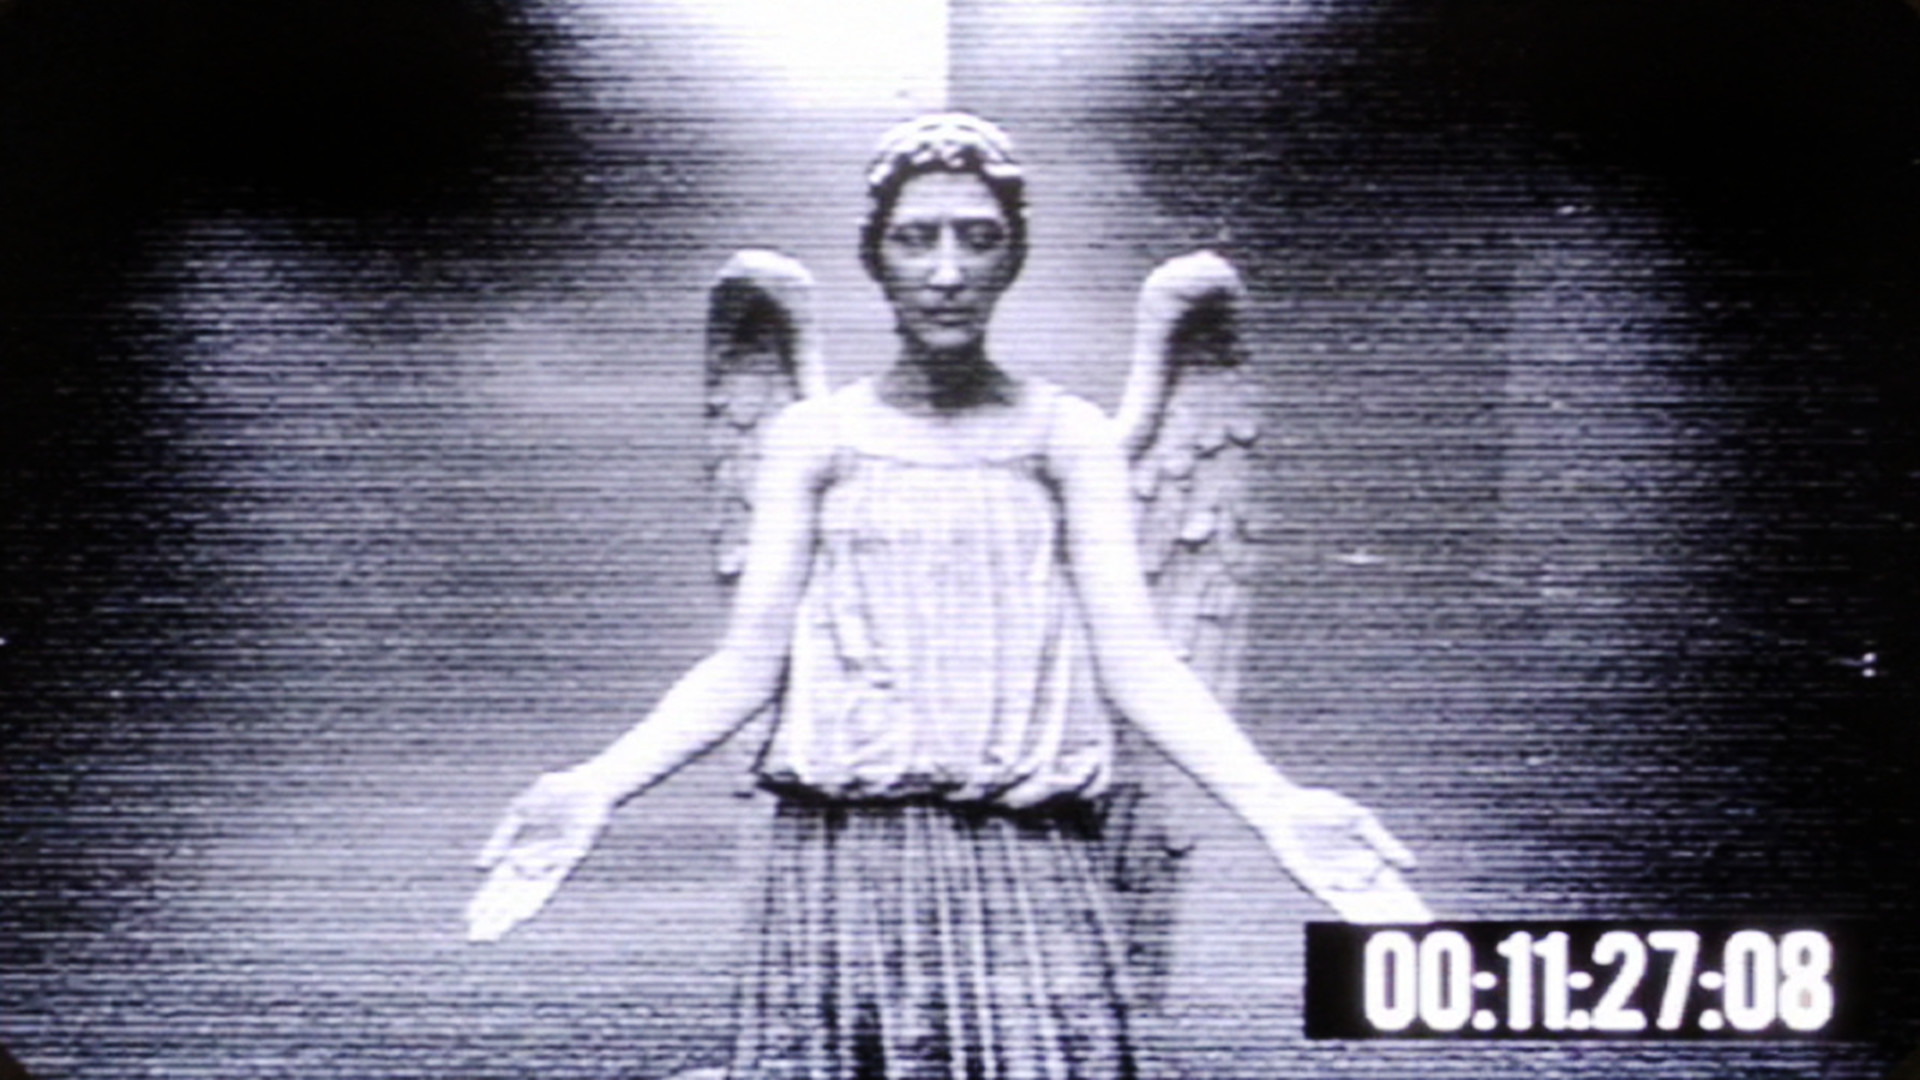 1920x1080 Weeping Angels wallpapers. Set it to change every few seconds for some fun.